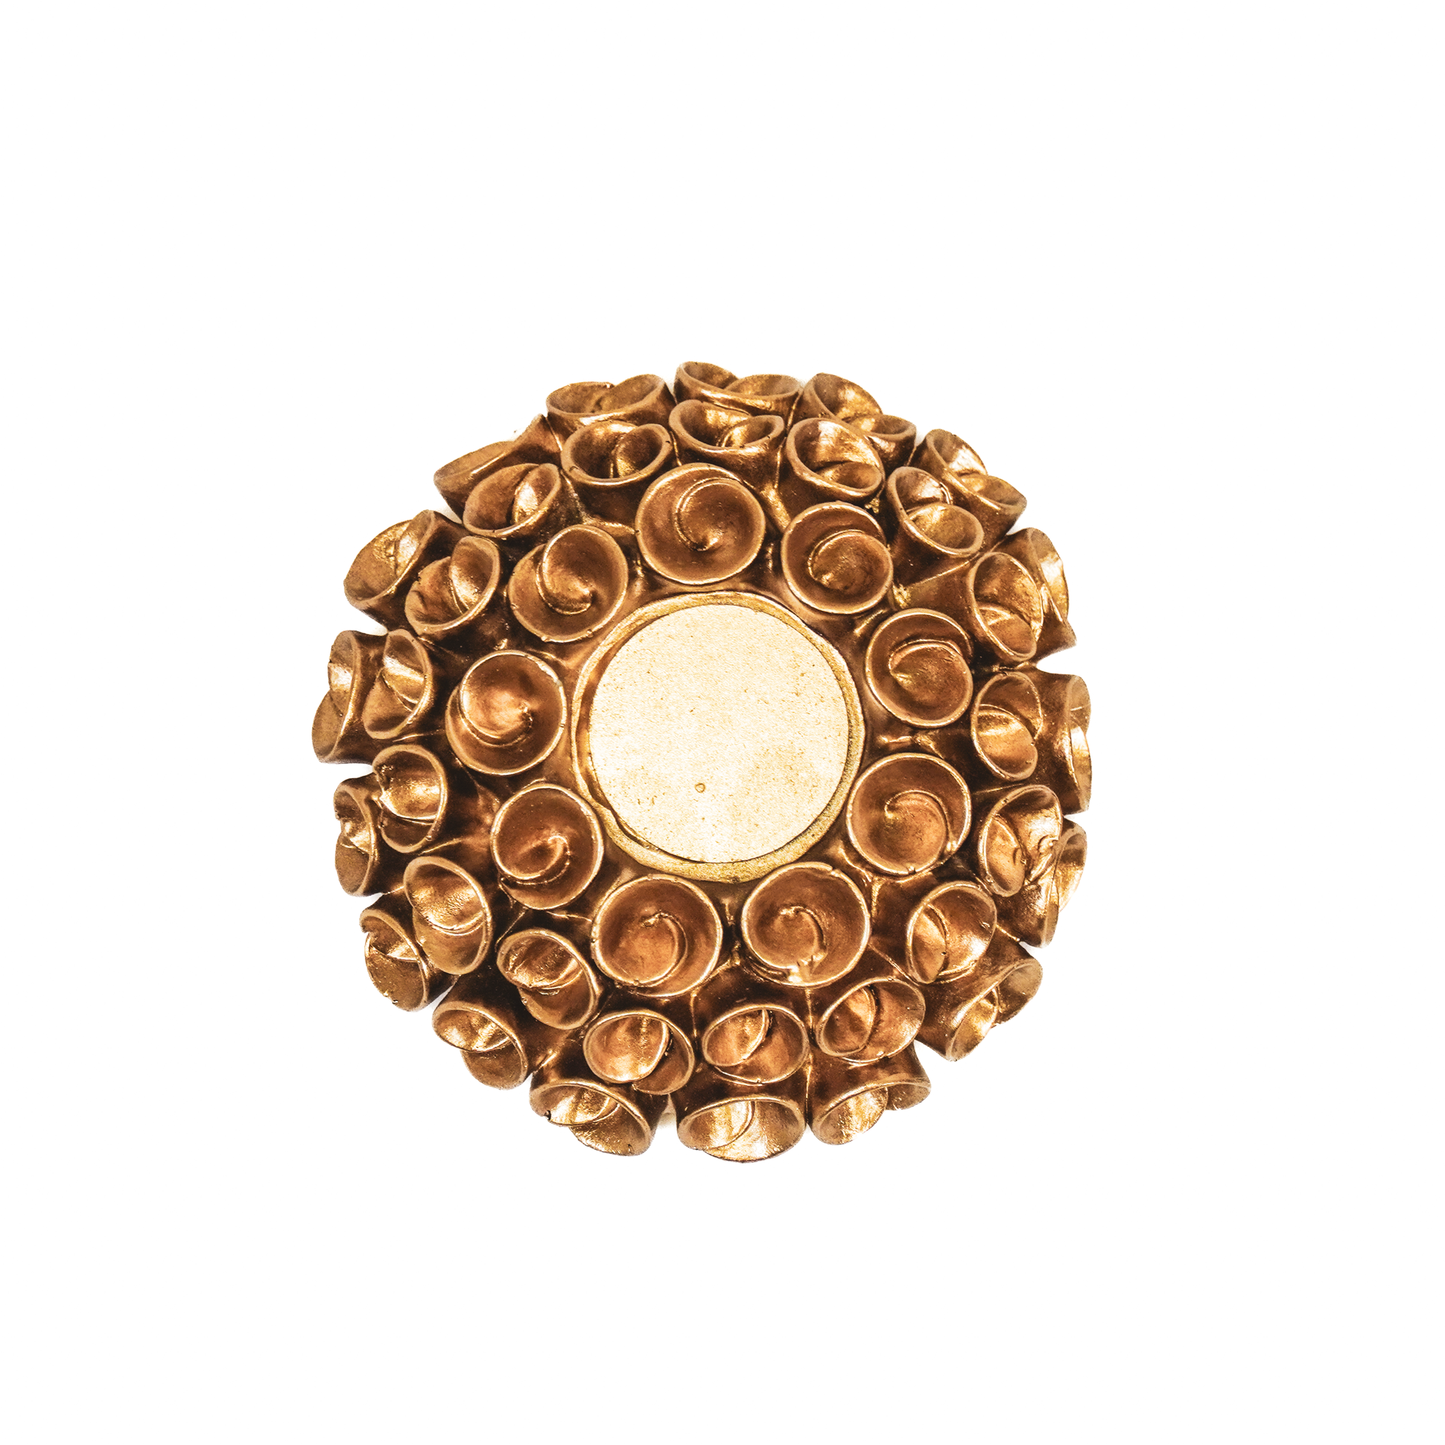 Housevitamin Coral Candle holder - Gold - 13x3x5cm